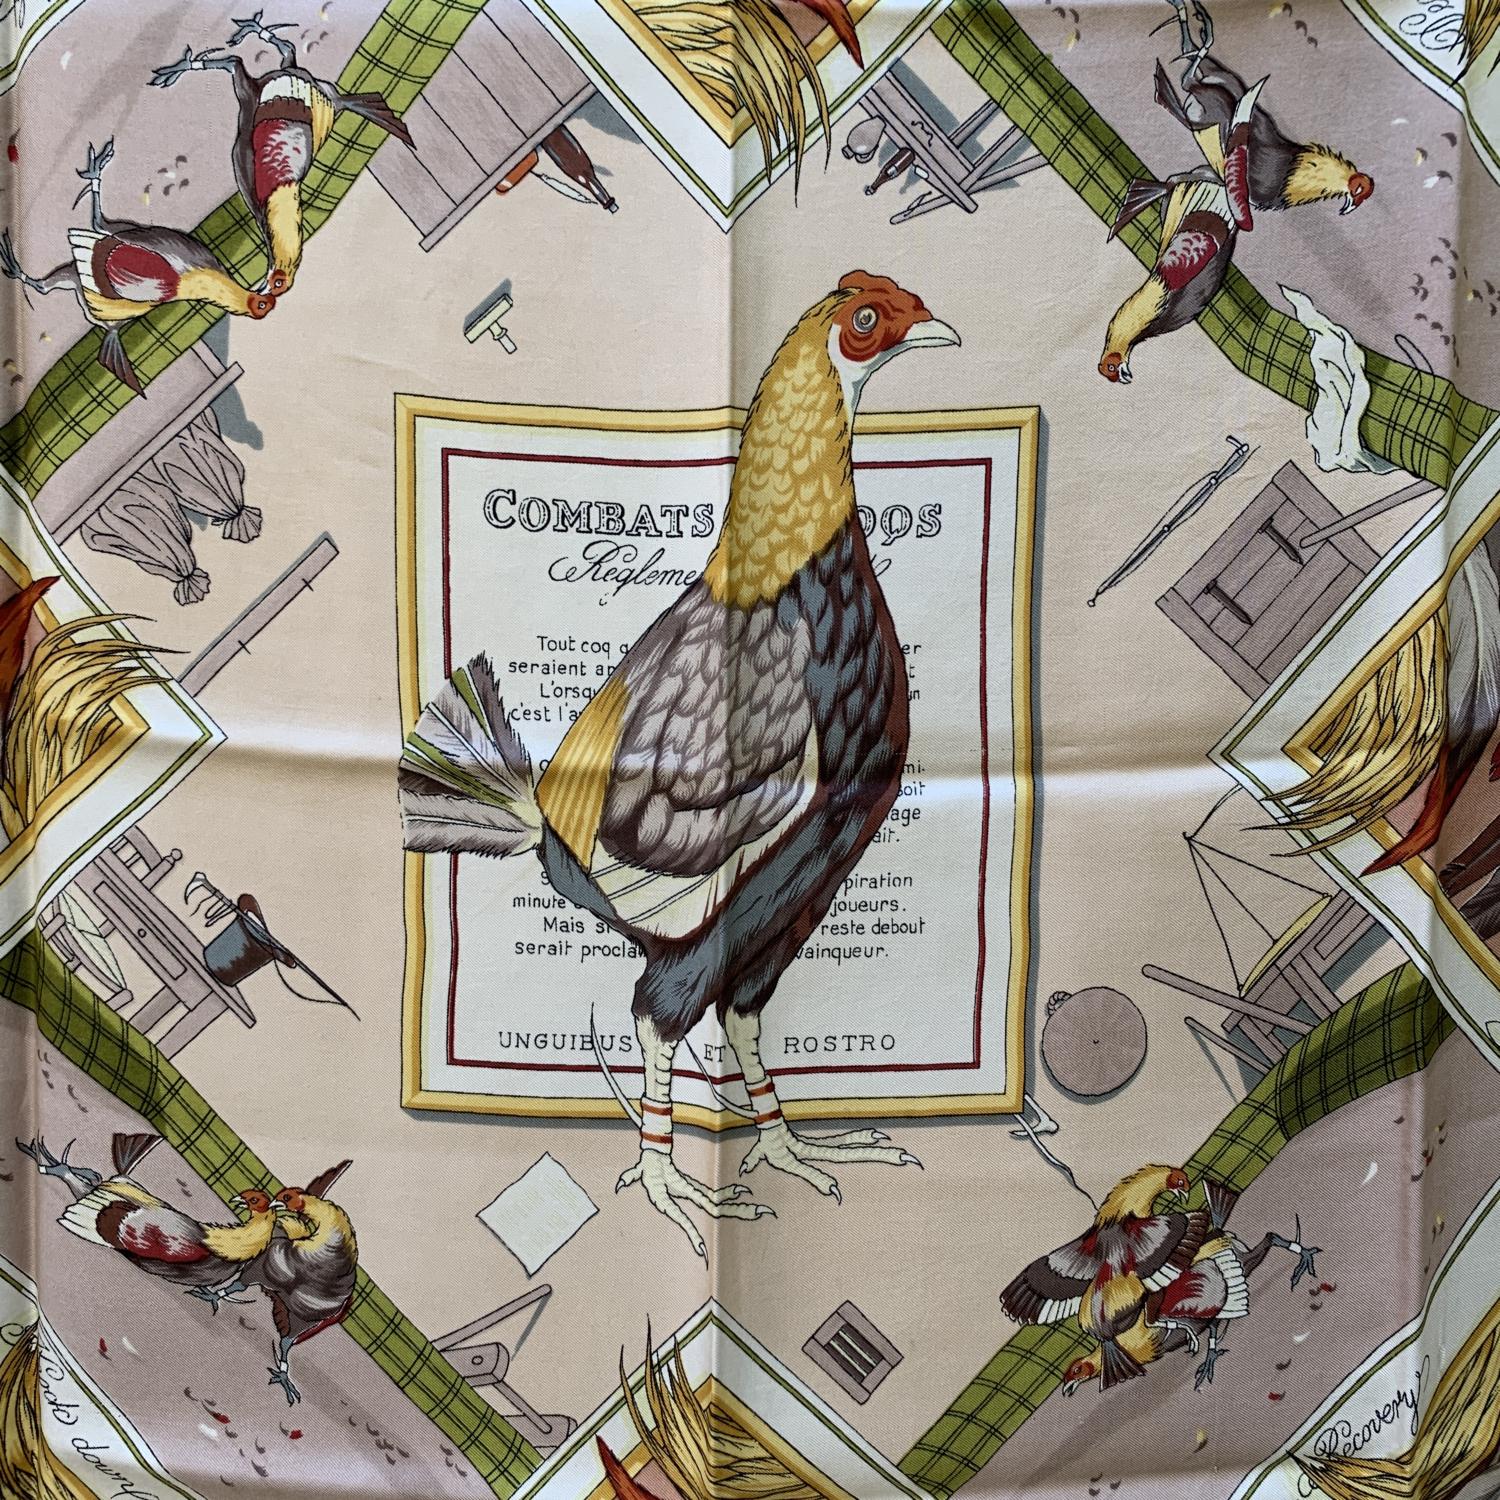 HERMES scarf 'Combats de Coqs ' (Cockfight) by Hugo Grygkar and originally issued in 1954. Black borders. 100% silk, hand rolled hem, made in France. Composition tag still attached. Measurements: 35 x 35 inches - 88,8 x 88, 8 cm. 'HERMES Paris'